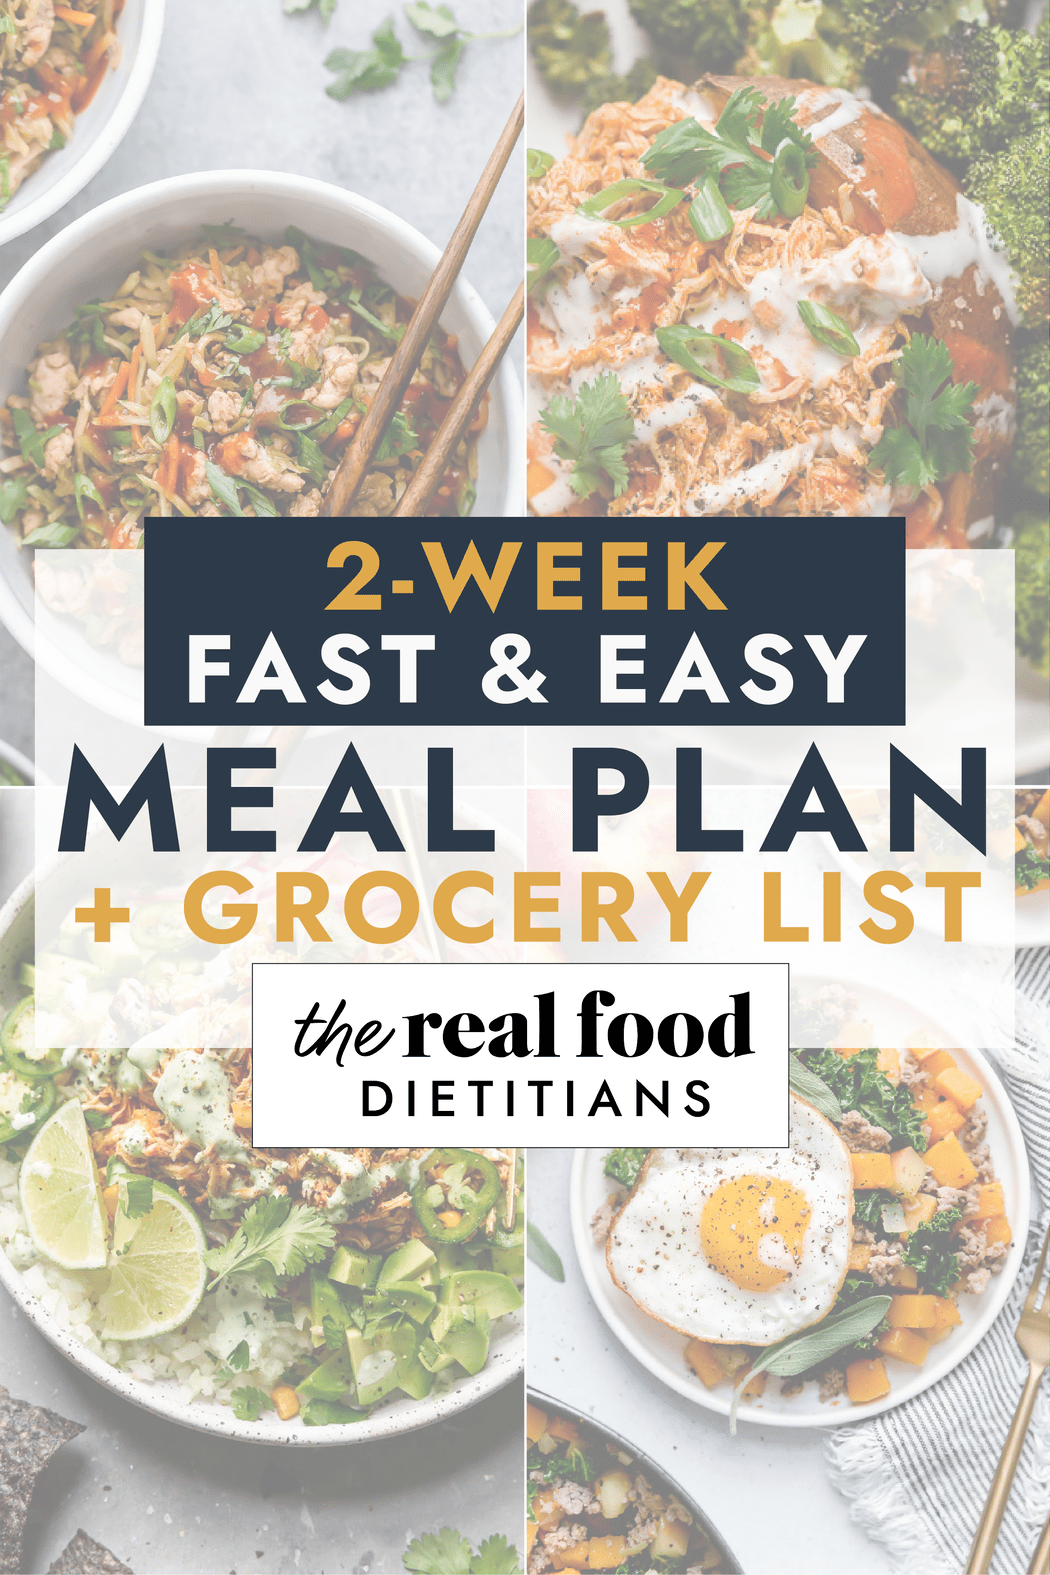 Whole Foods Haul - Family Meal Plan For a Week